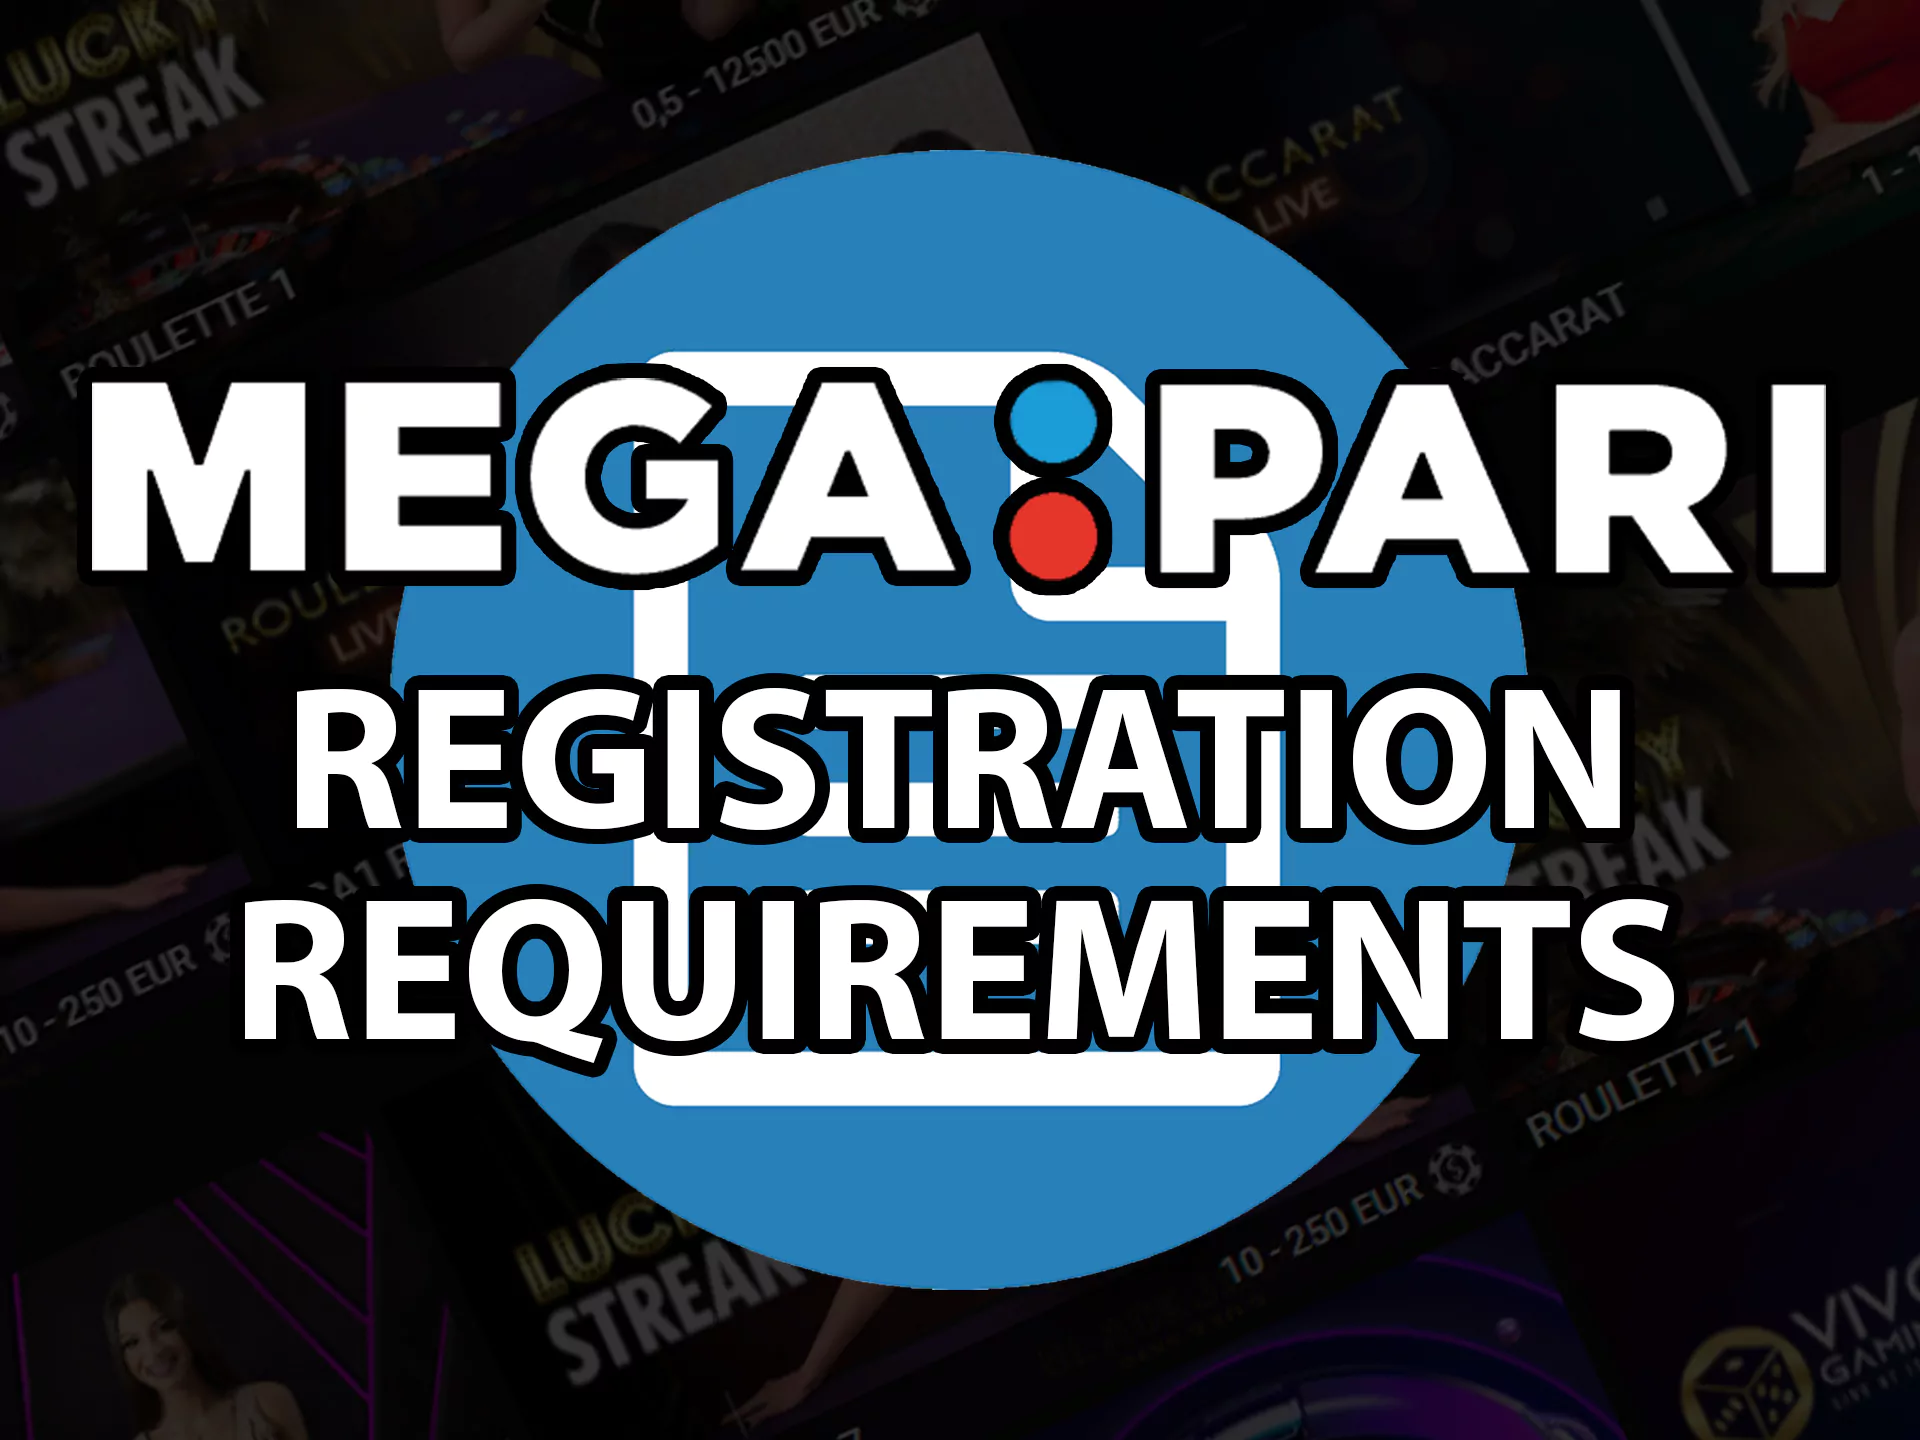 You can register with Mega Pari if you meet all the requirements